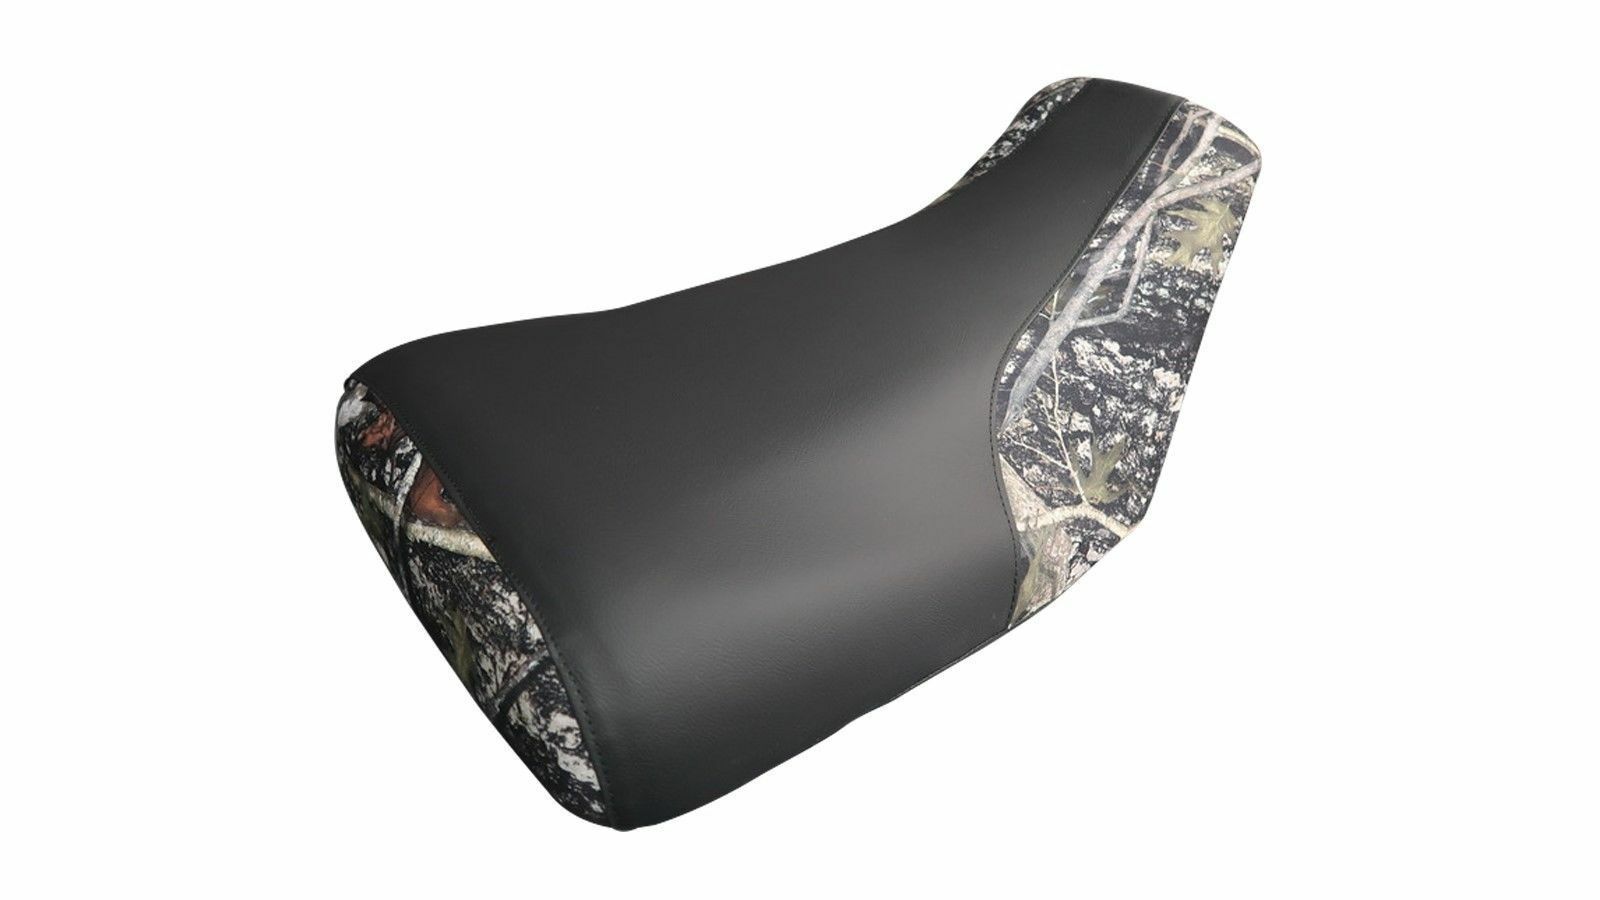 For Honda Rancher Seat Cover 2004 To 2006 Black Top Camo Side ATV Seat Cover #FY - $32.90